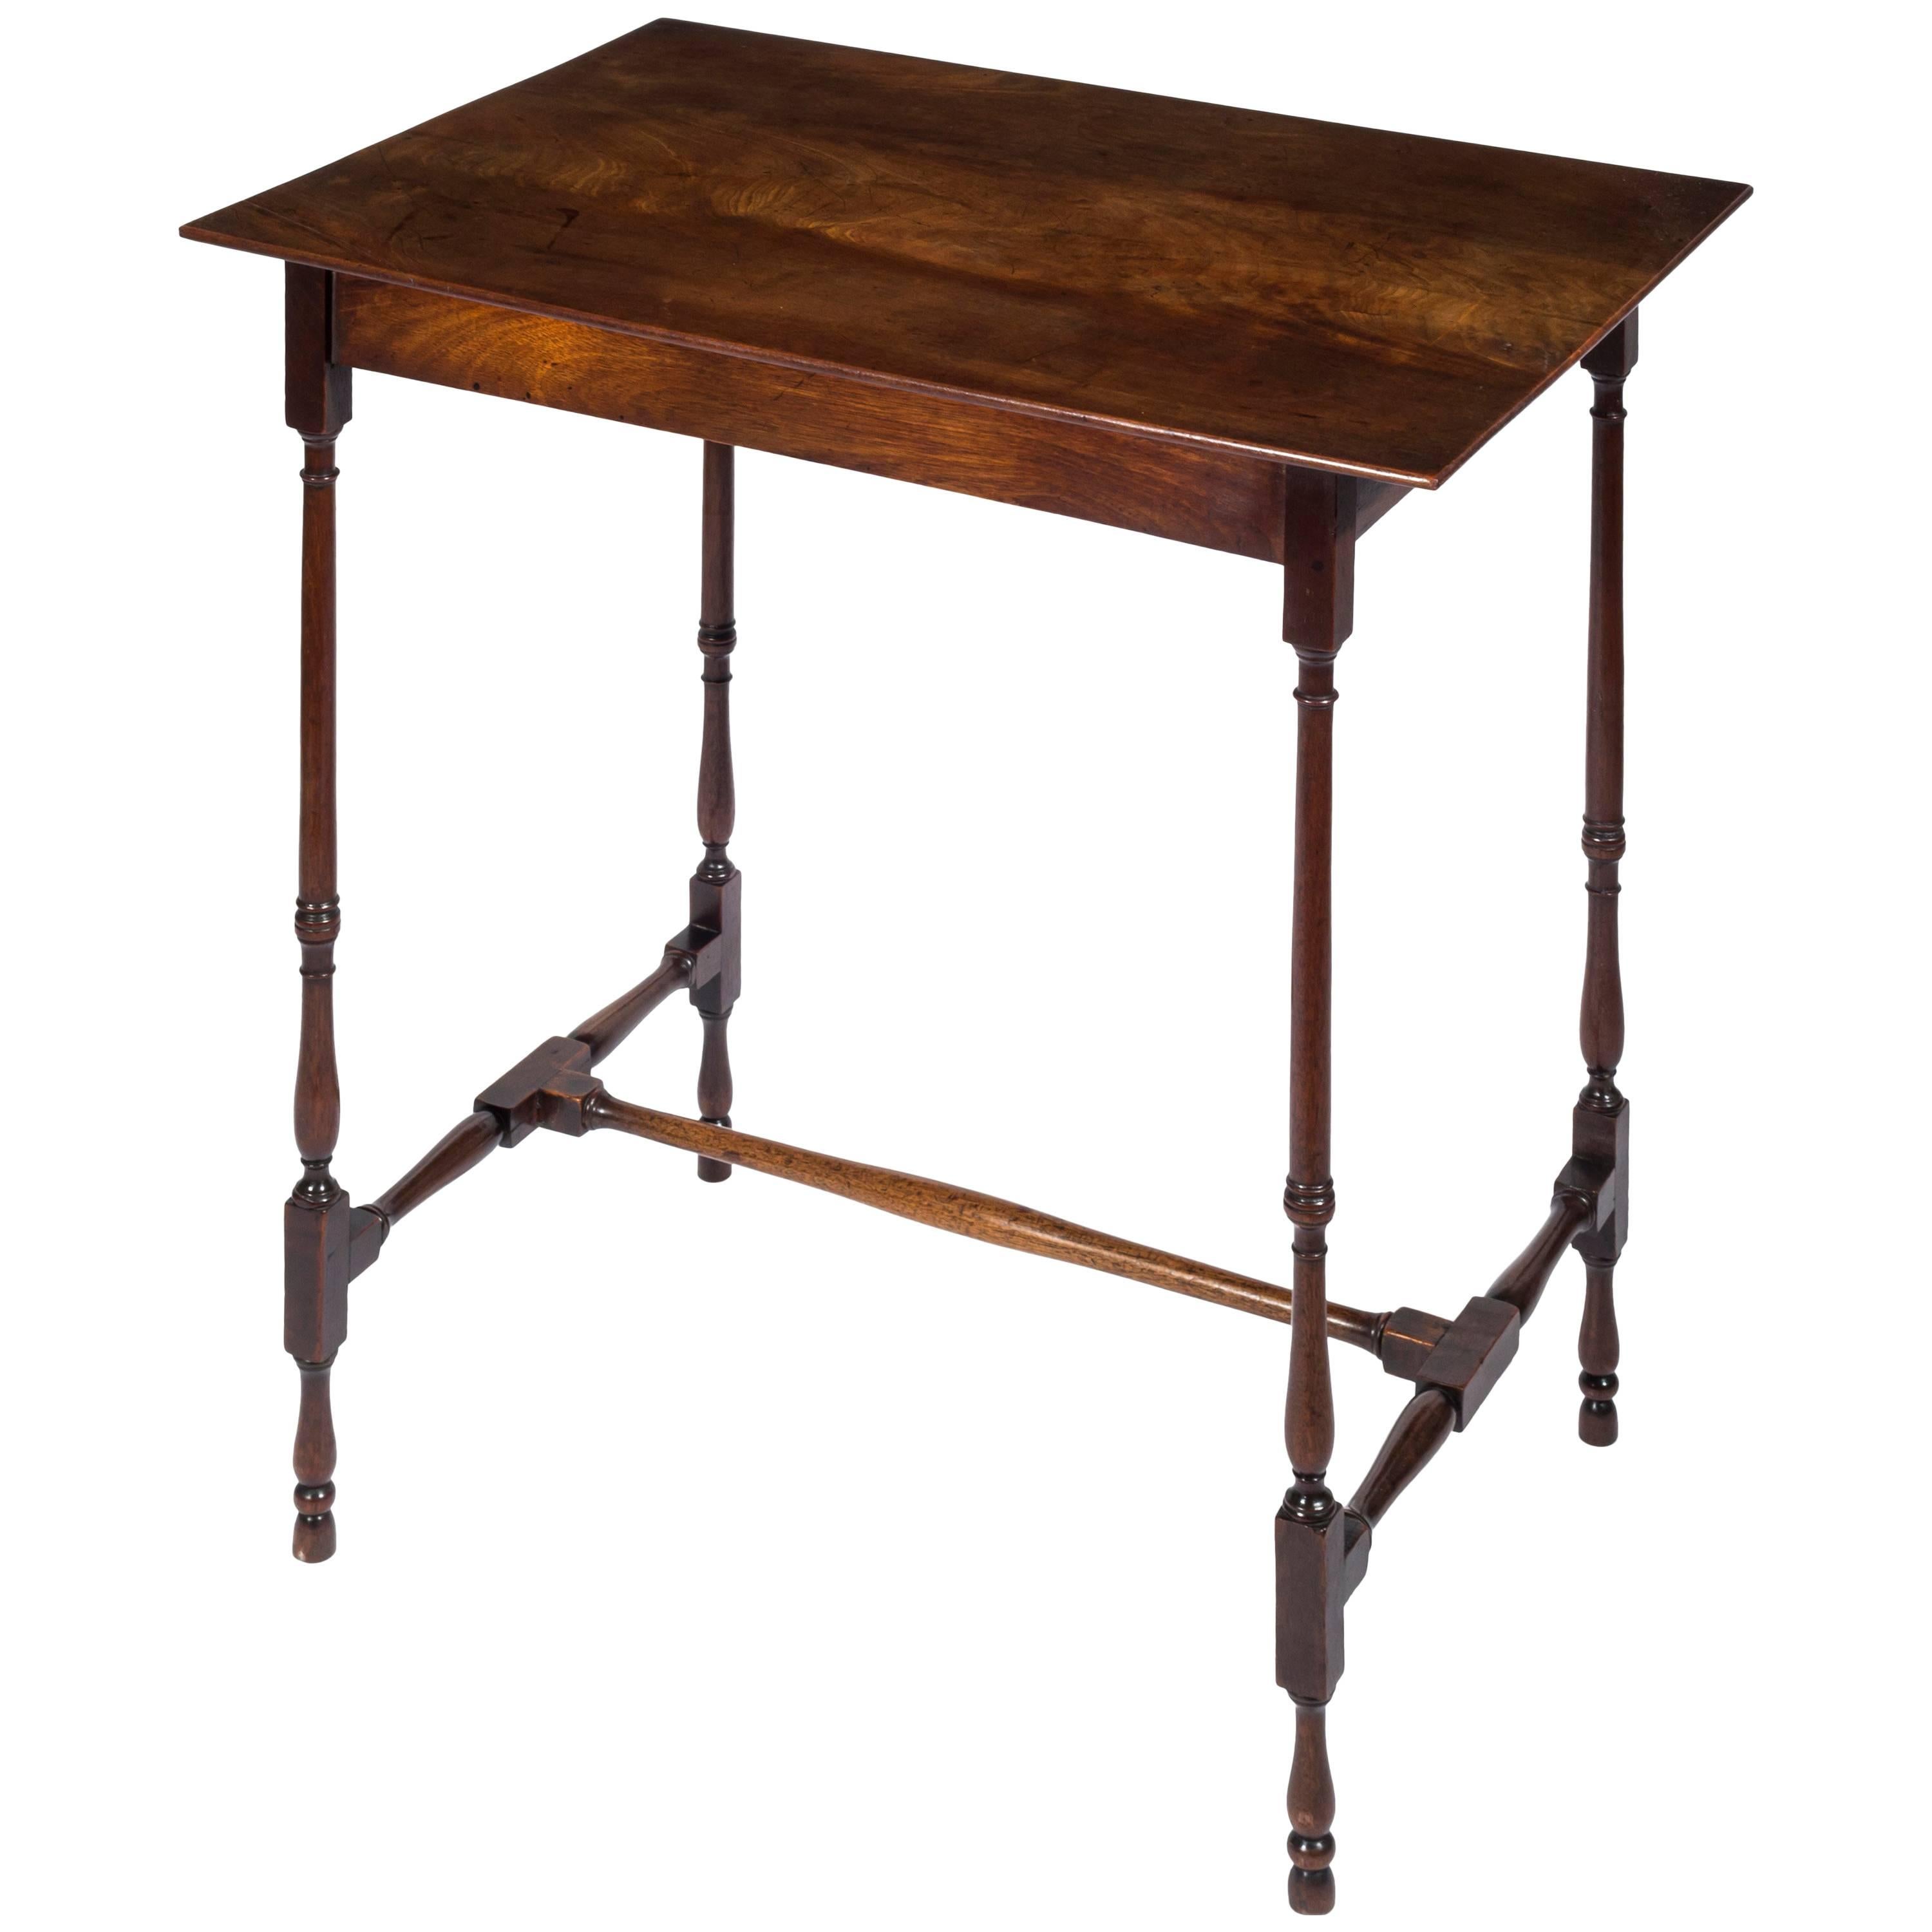 English 18th Century George III Chippendale Spider Leg Mahogany Side Table